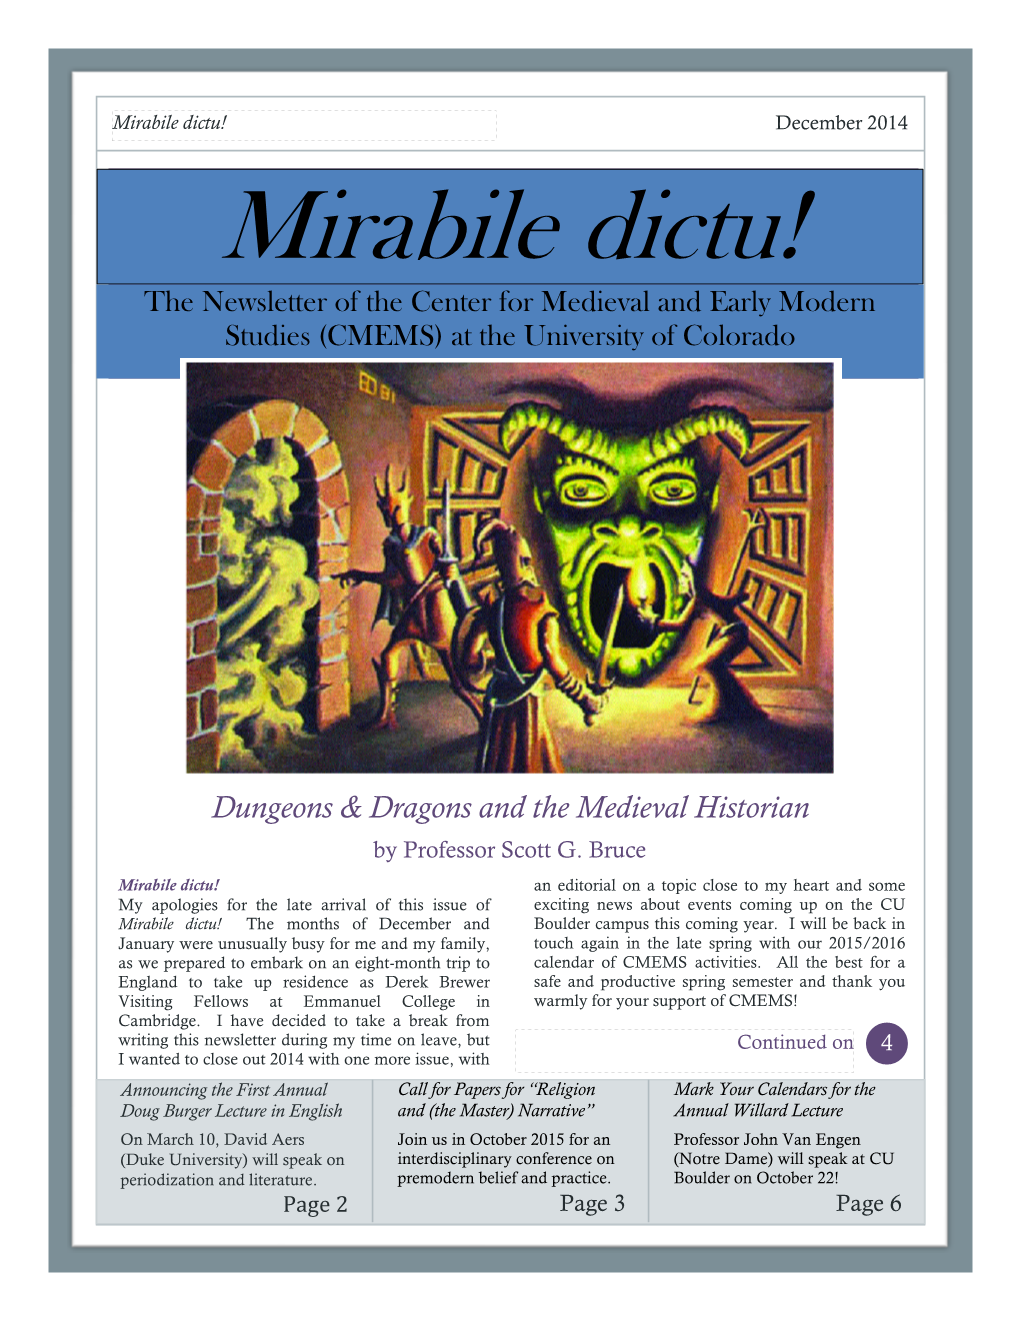 Mirabile Dictu! December 2014 Mirabile Dictu! the Newsletter of the Center for Medieval and Early Modern Studies (CMEMS) at the University of Colorado